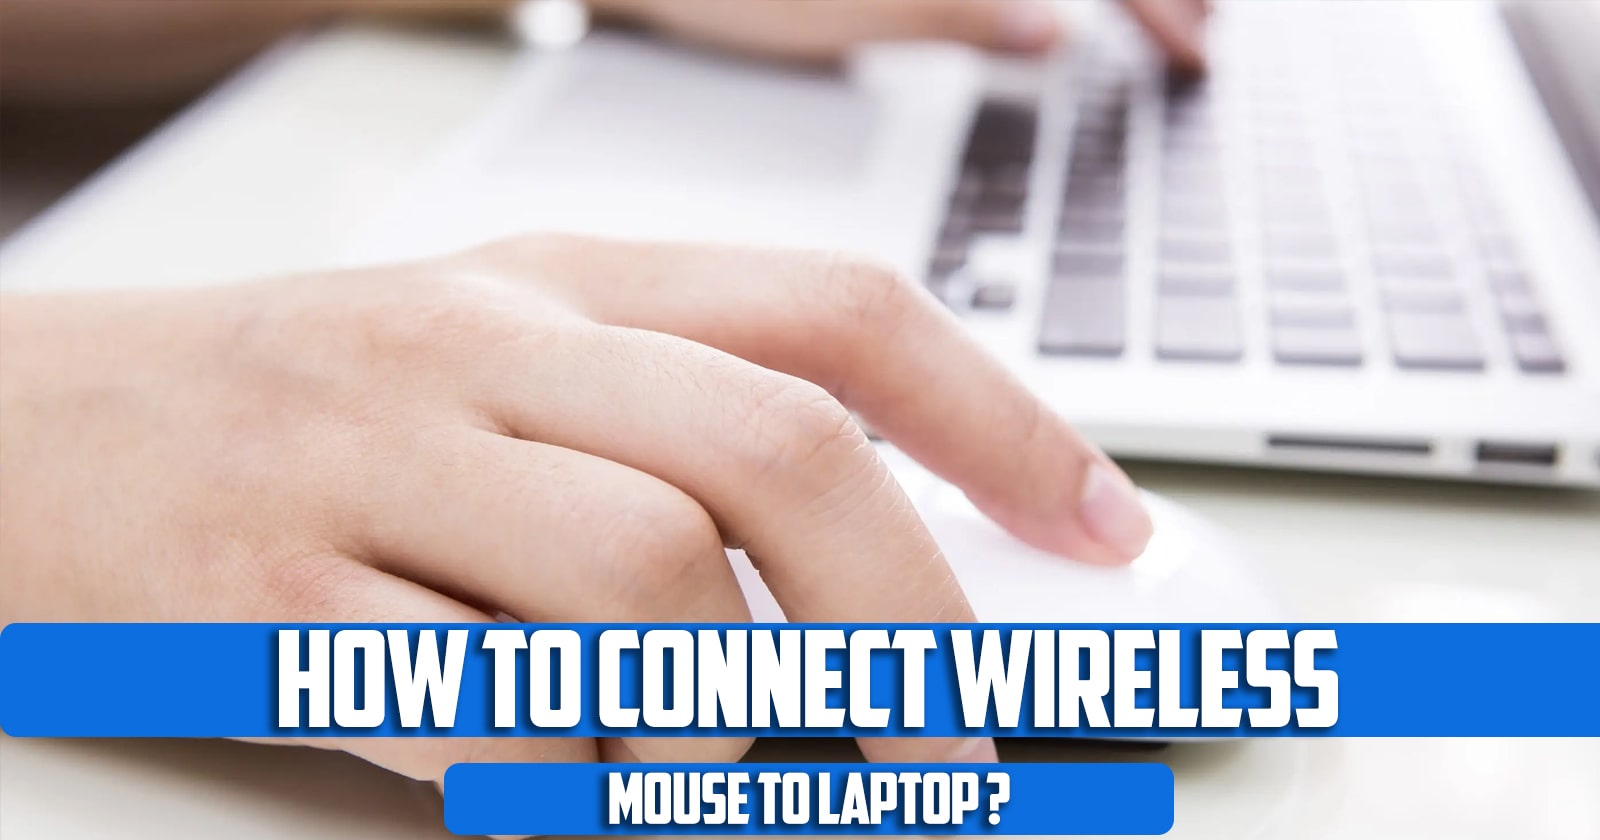 How to connect wireless mouse to laptop?